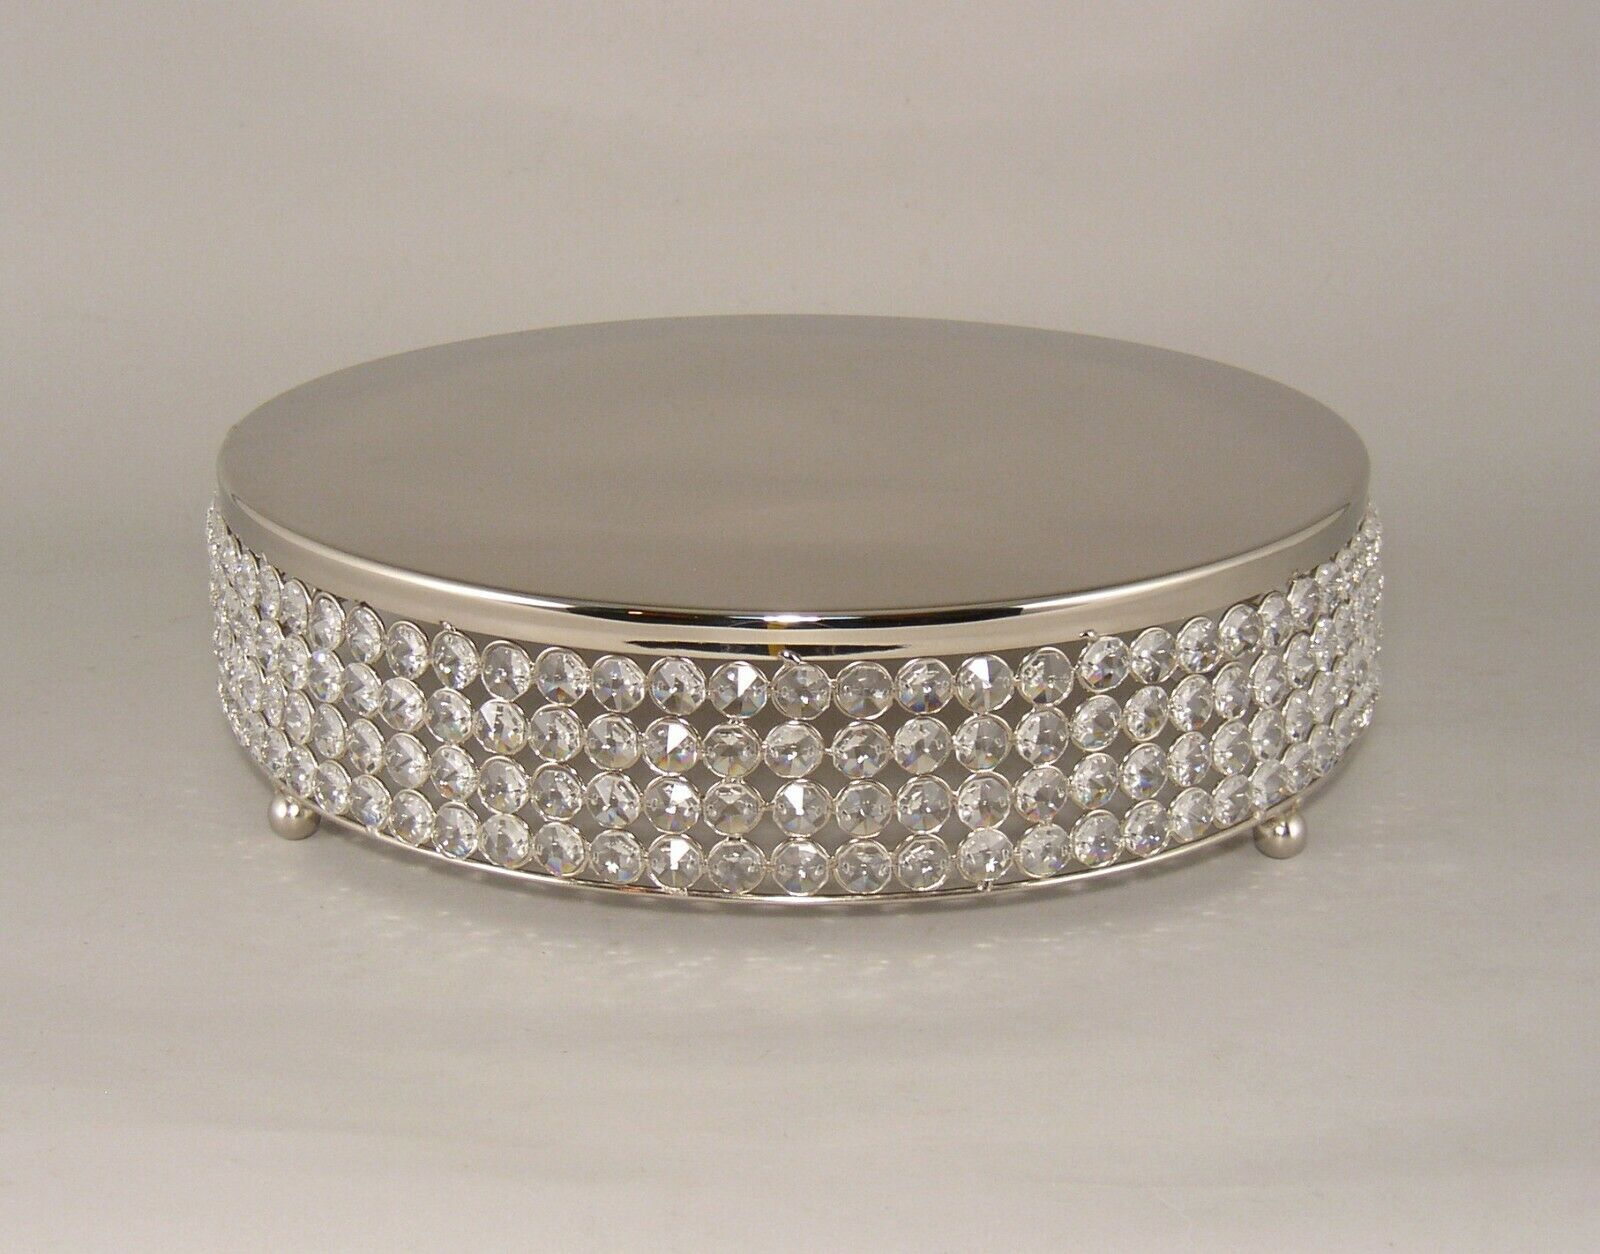 Cake Stand Plate Metal 4 Rows Of Clear Crystal Beads Silver 14"dia X 4"high